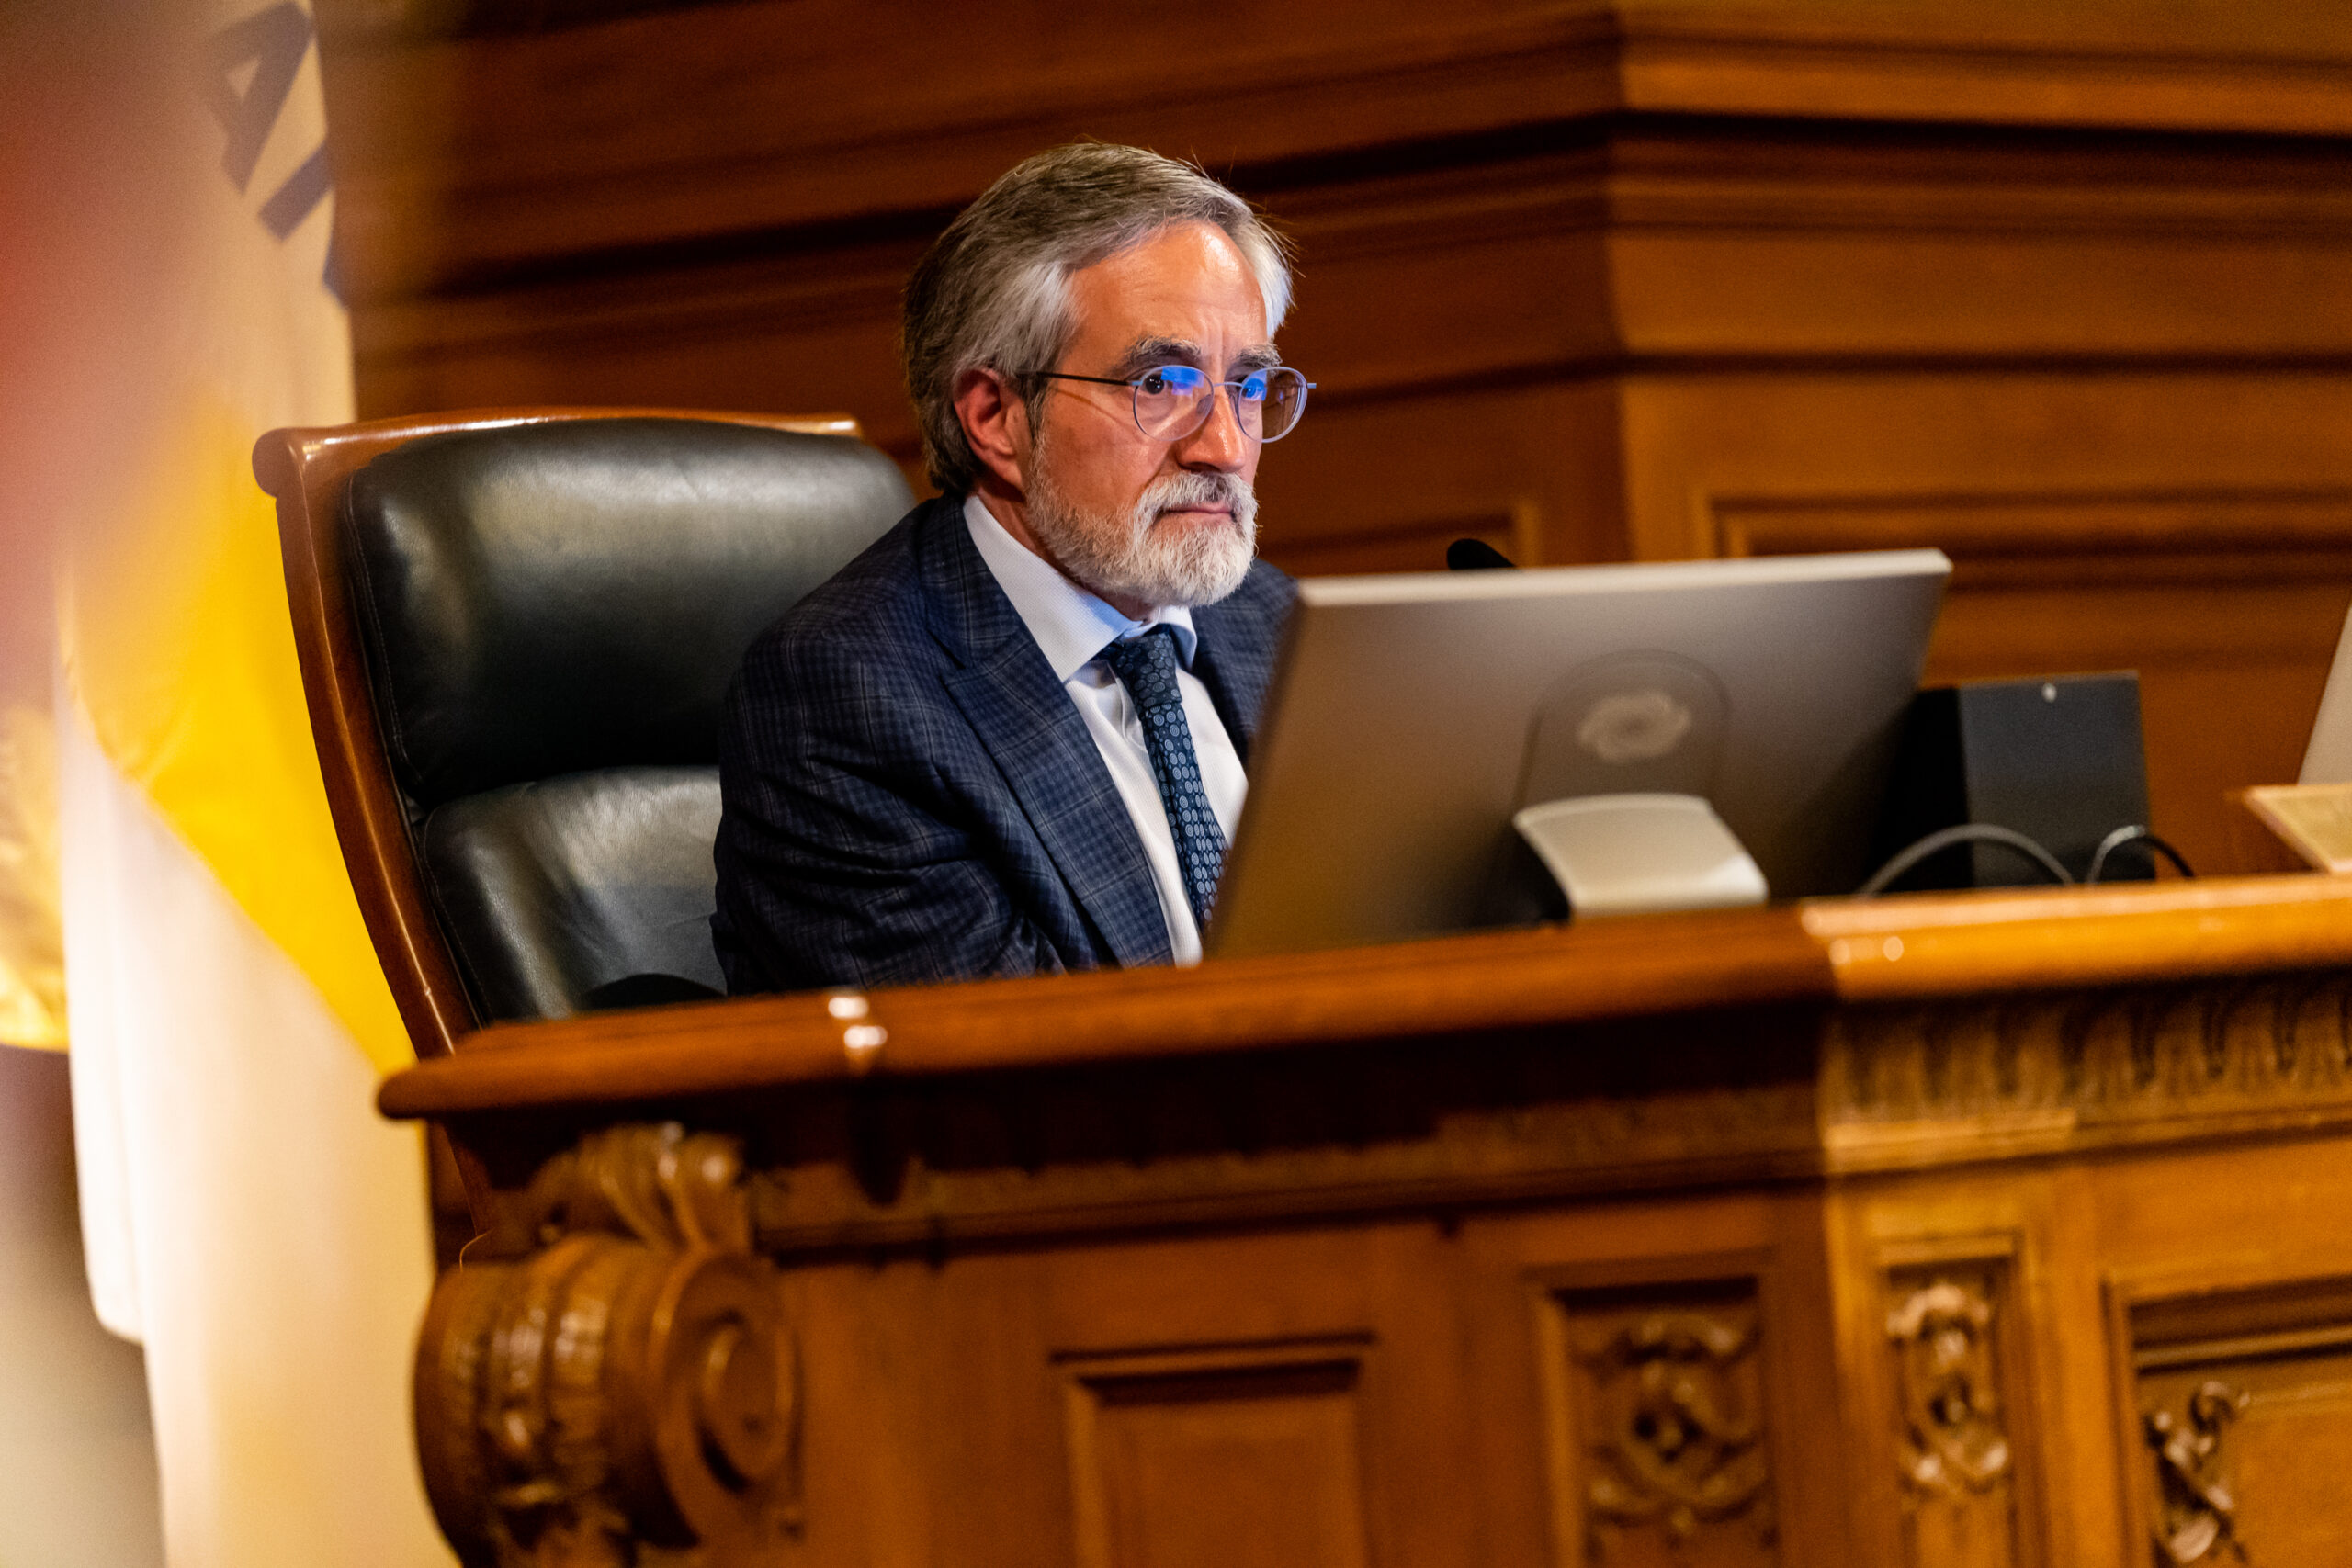 Aaron Peskin presides over a Board of Supervisors meeting.